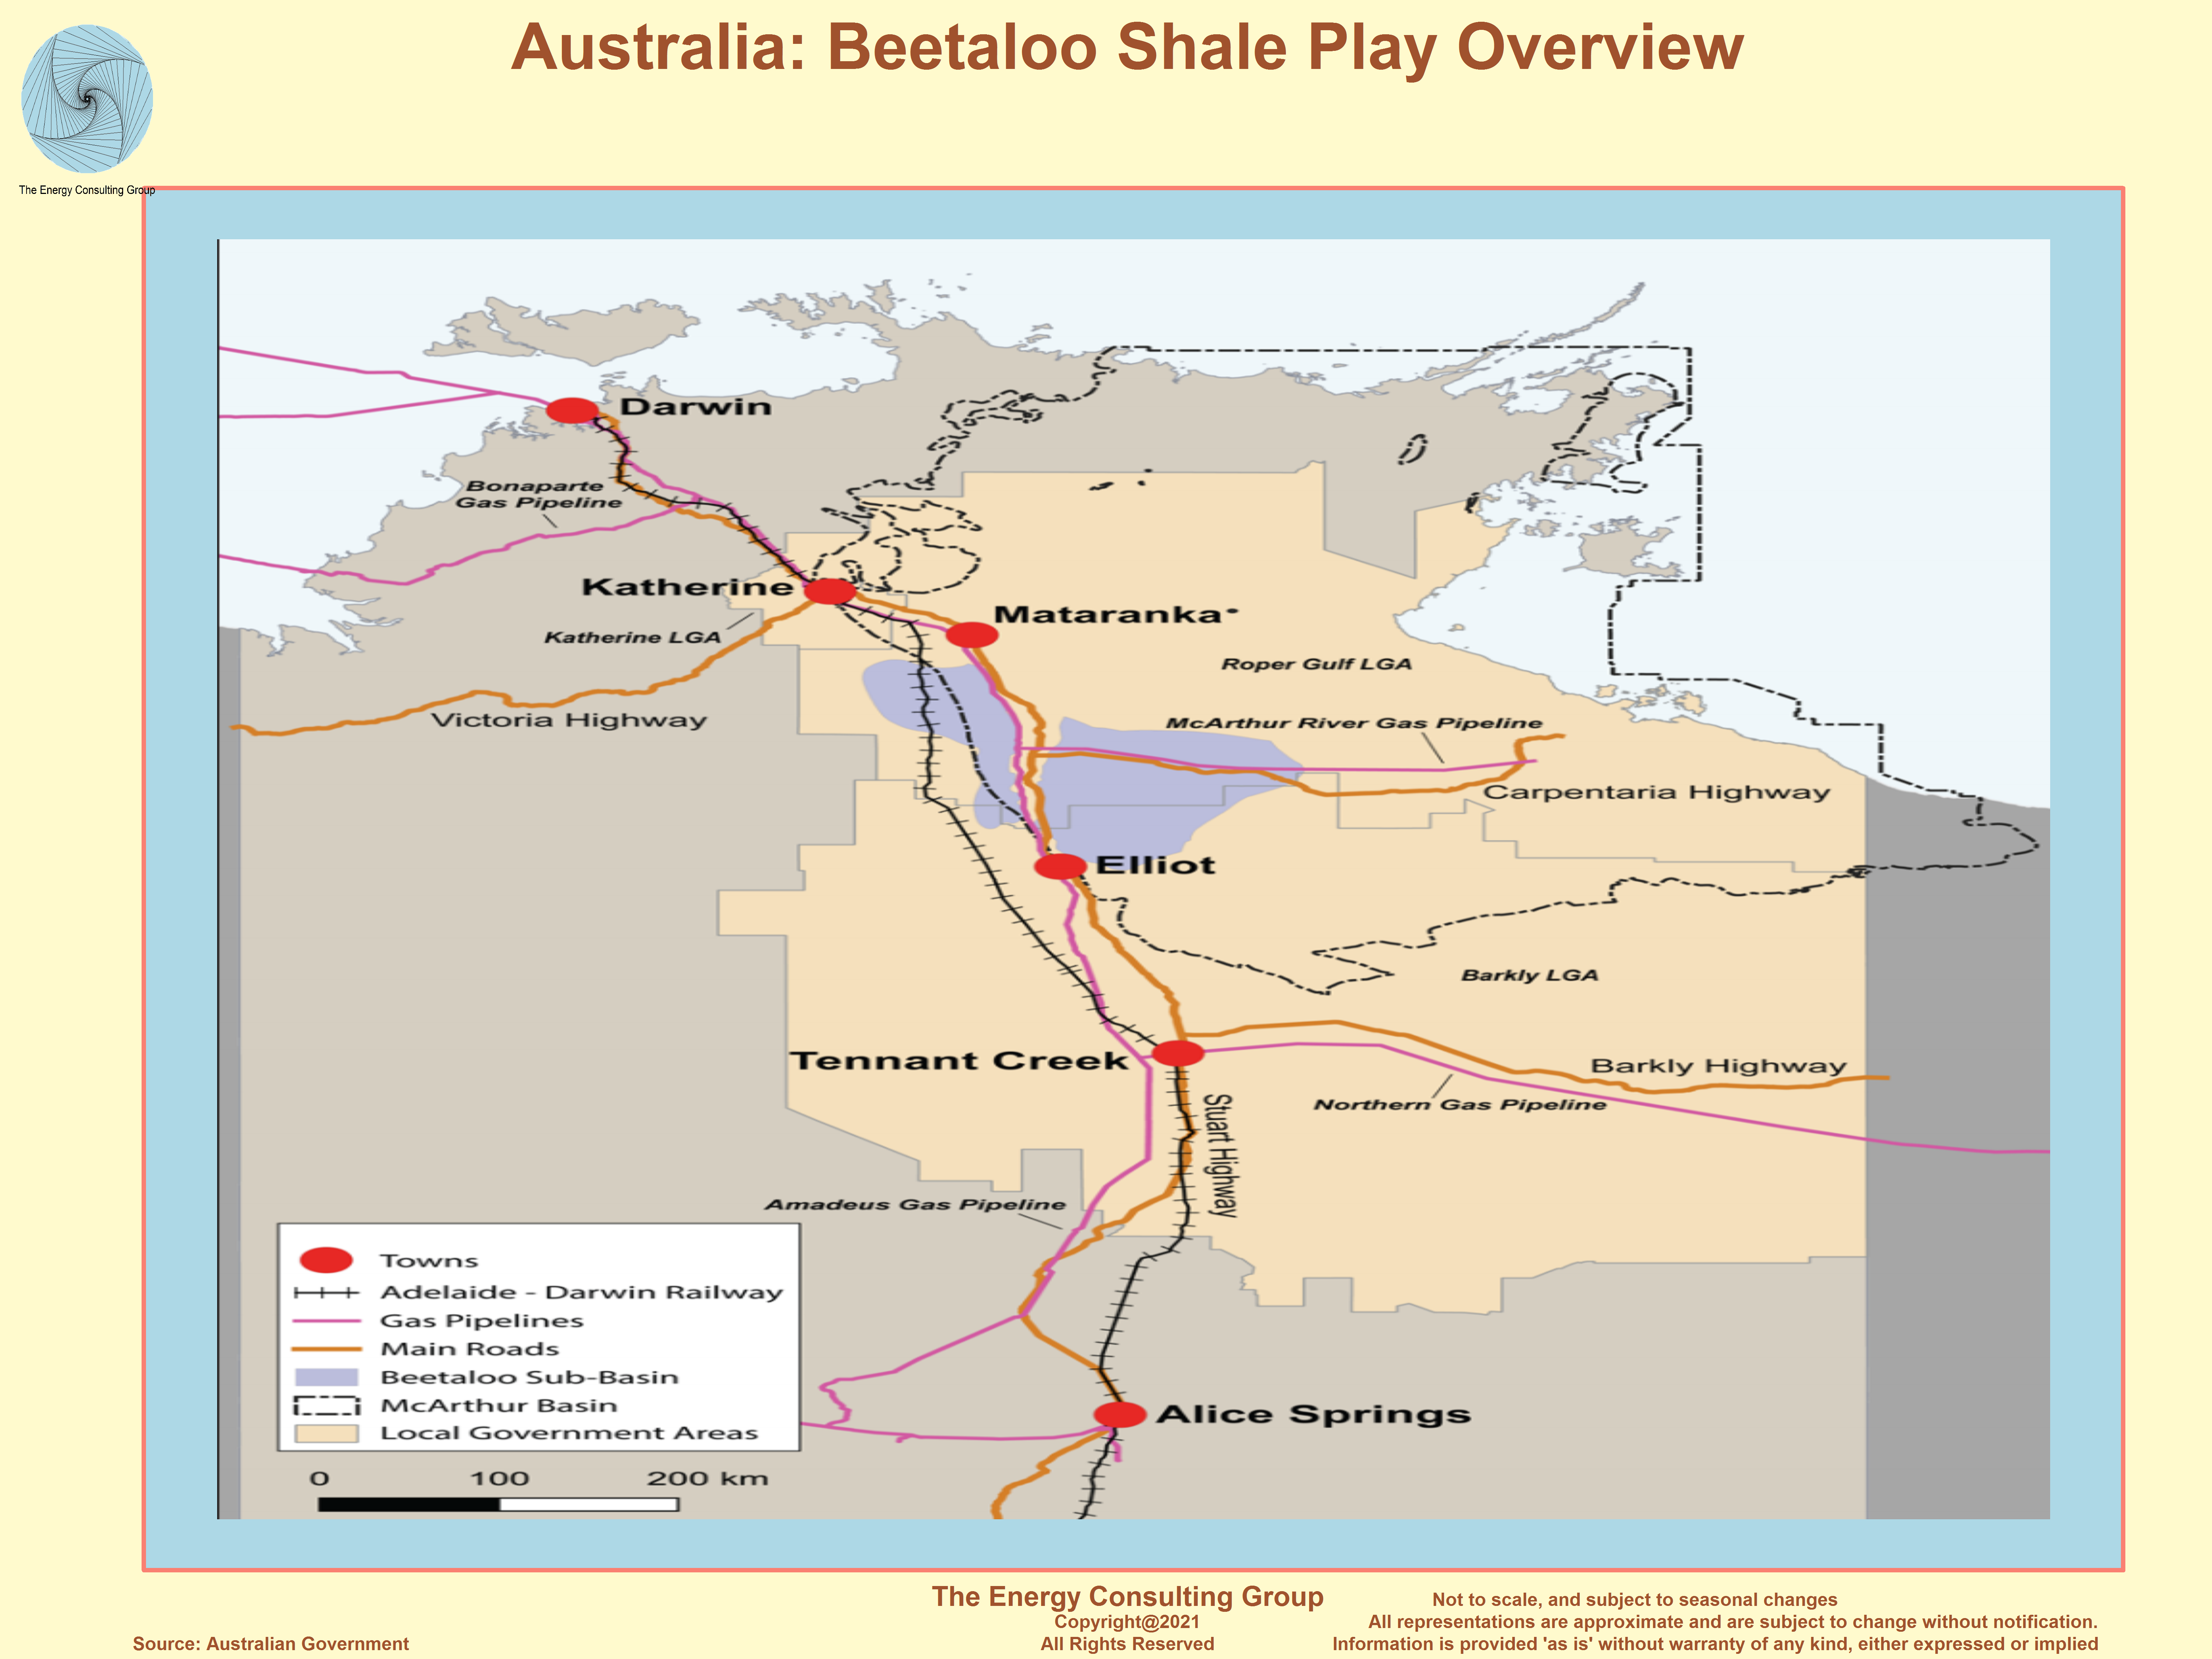 Australia and Gas Overview